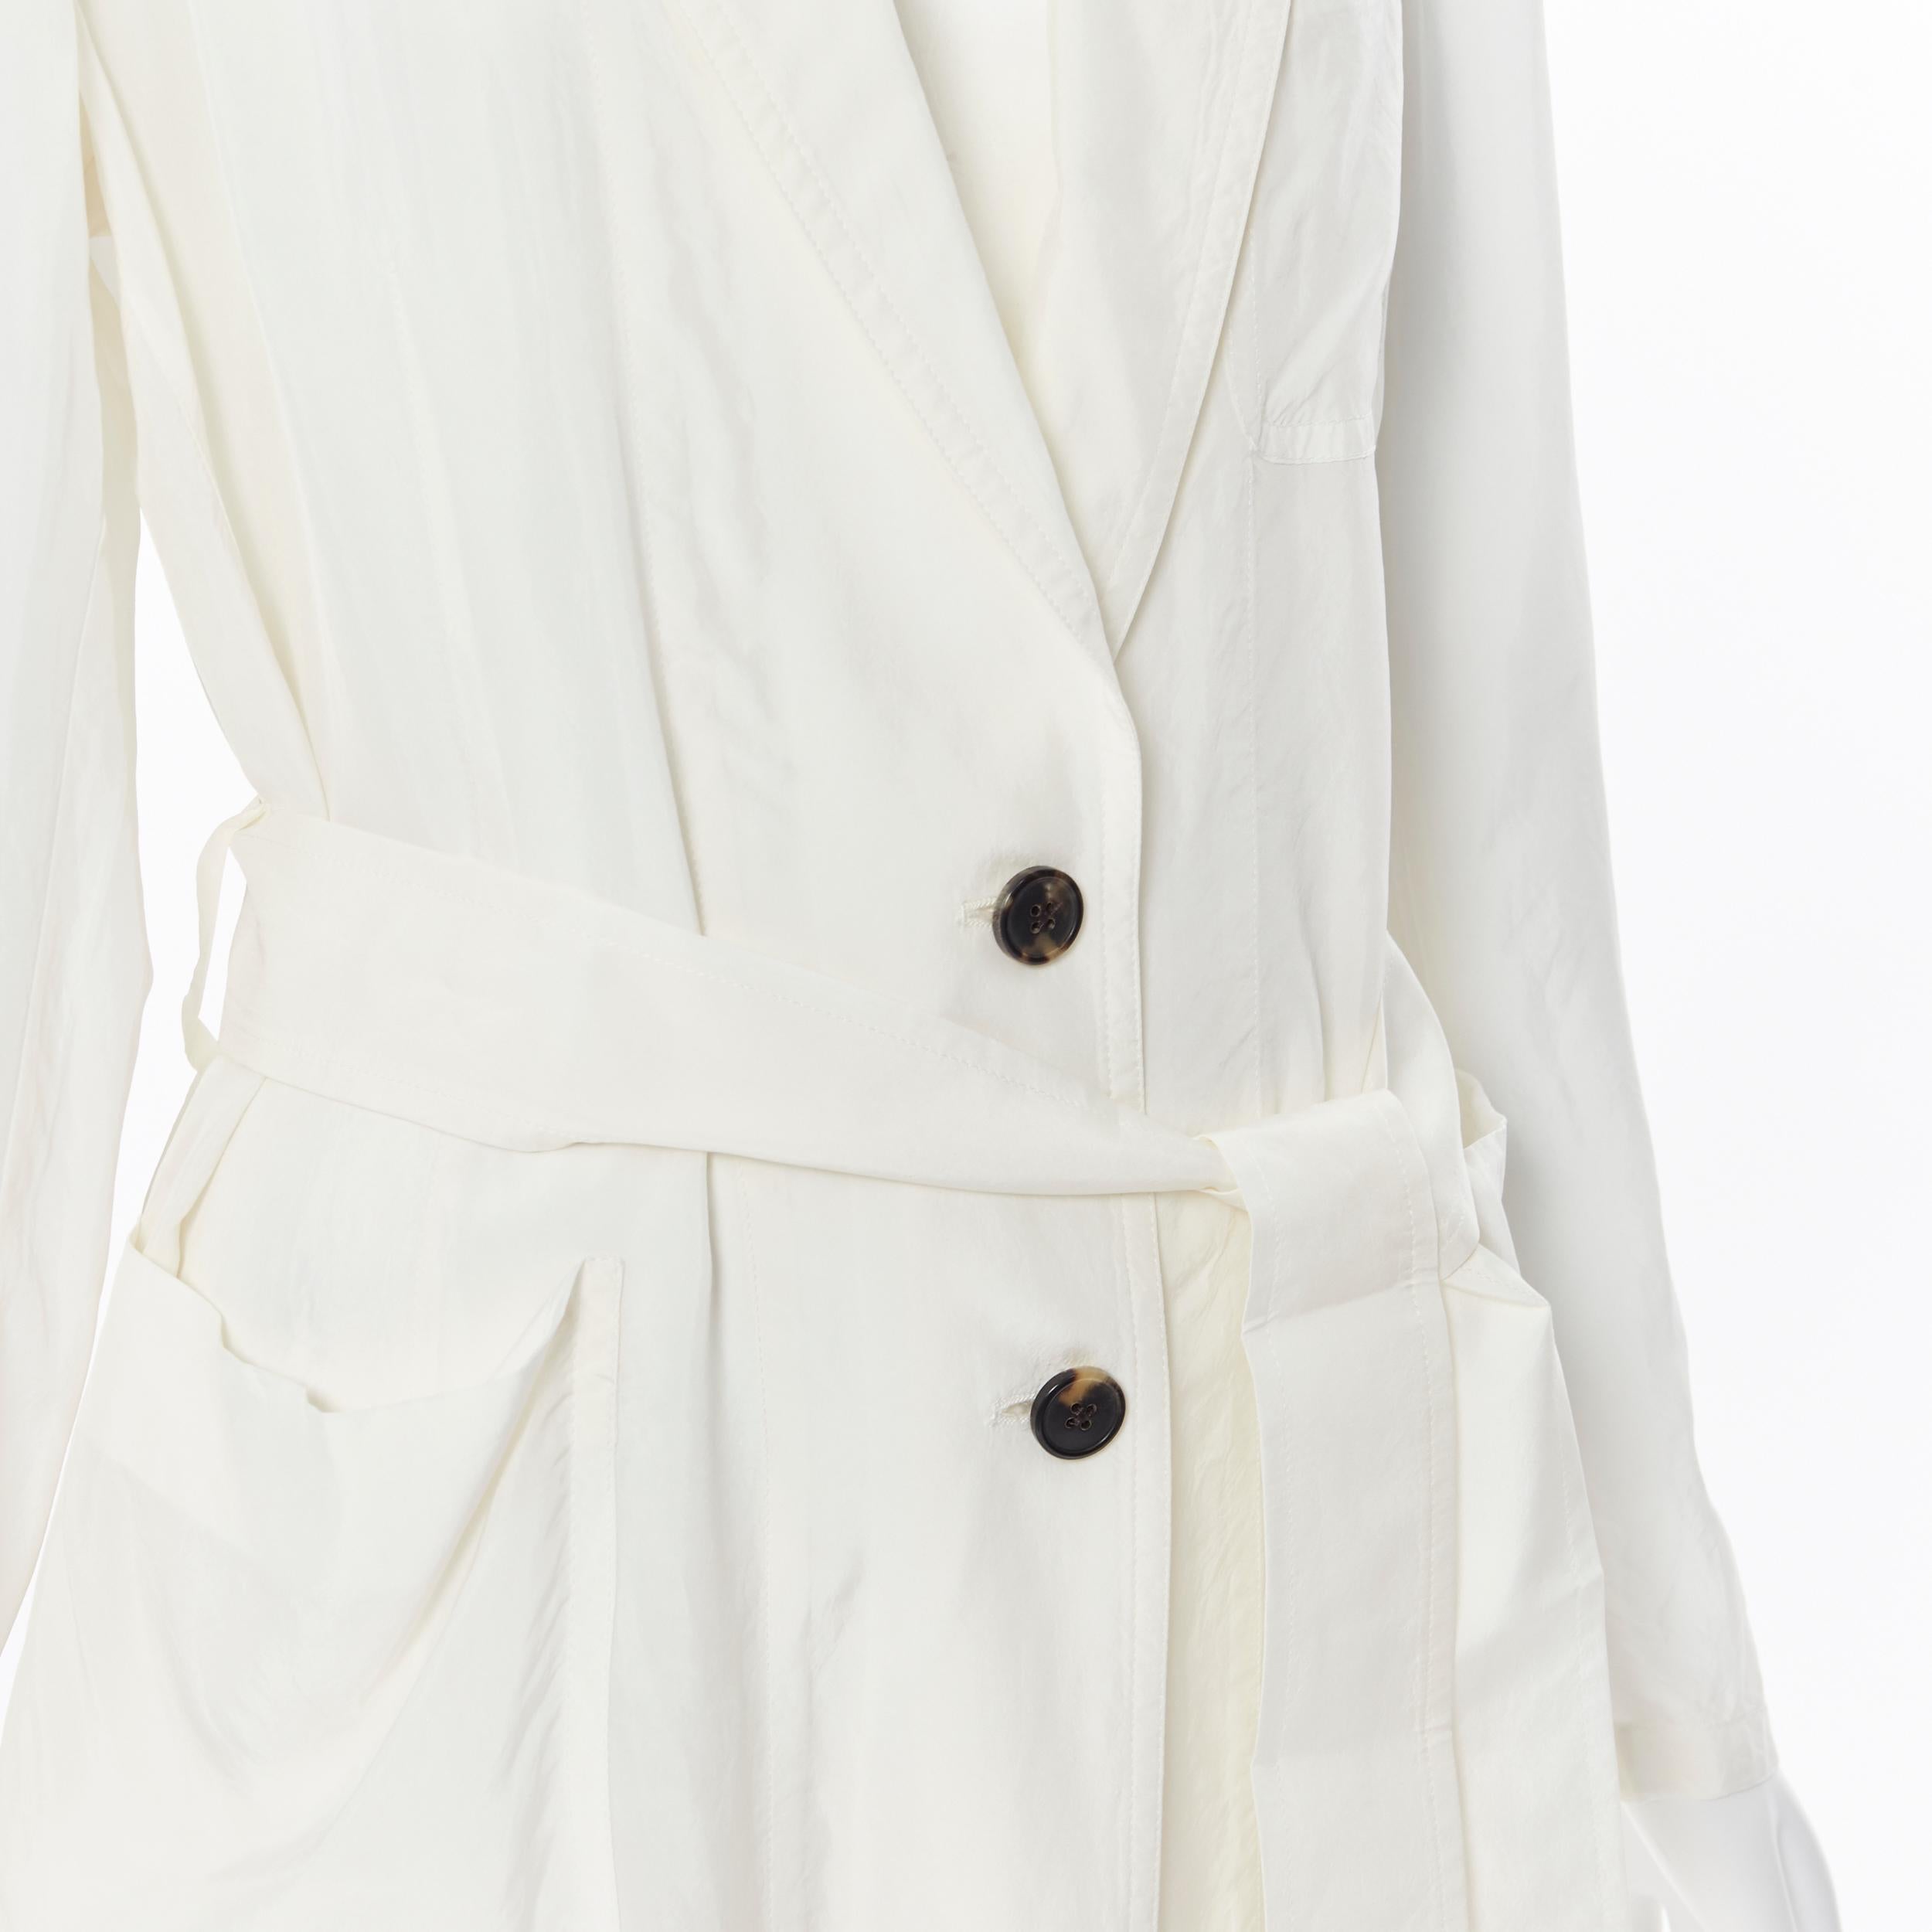 DRIES VAN NOTEN 100% cupro white turtoise resin button long lab coat Fr38 S
Brand: Dries Van Noten
Designer: Dries Van Noten
Model Name / Style: Cupro coat
Material: Cupro
Color: White
Pattern: Solid
Closure: Button
Extra Detail: 3-pocket design.